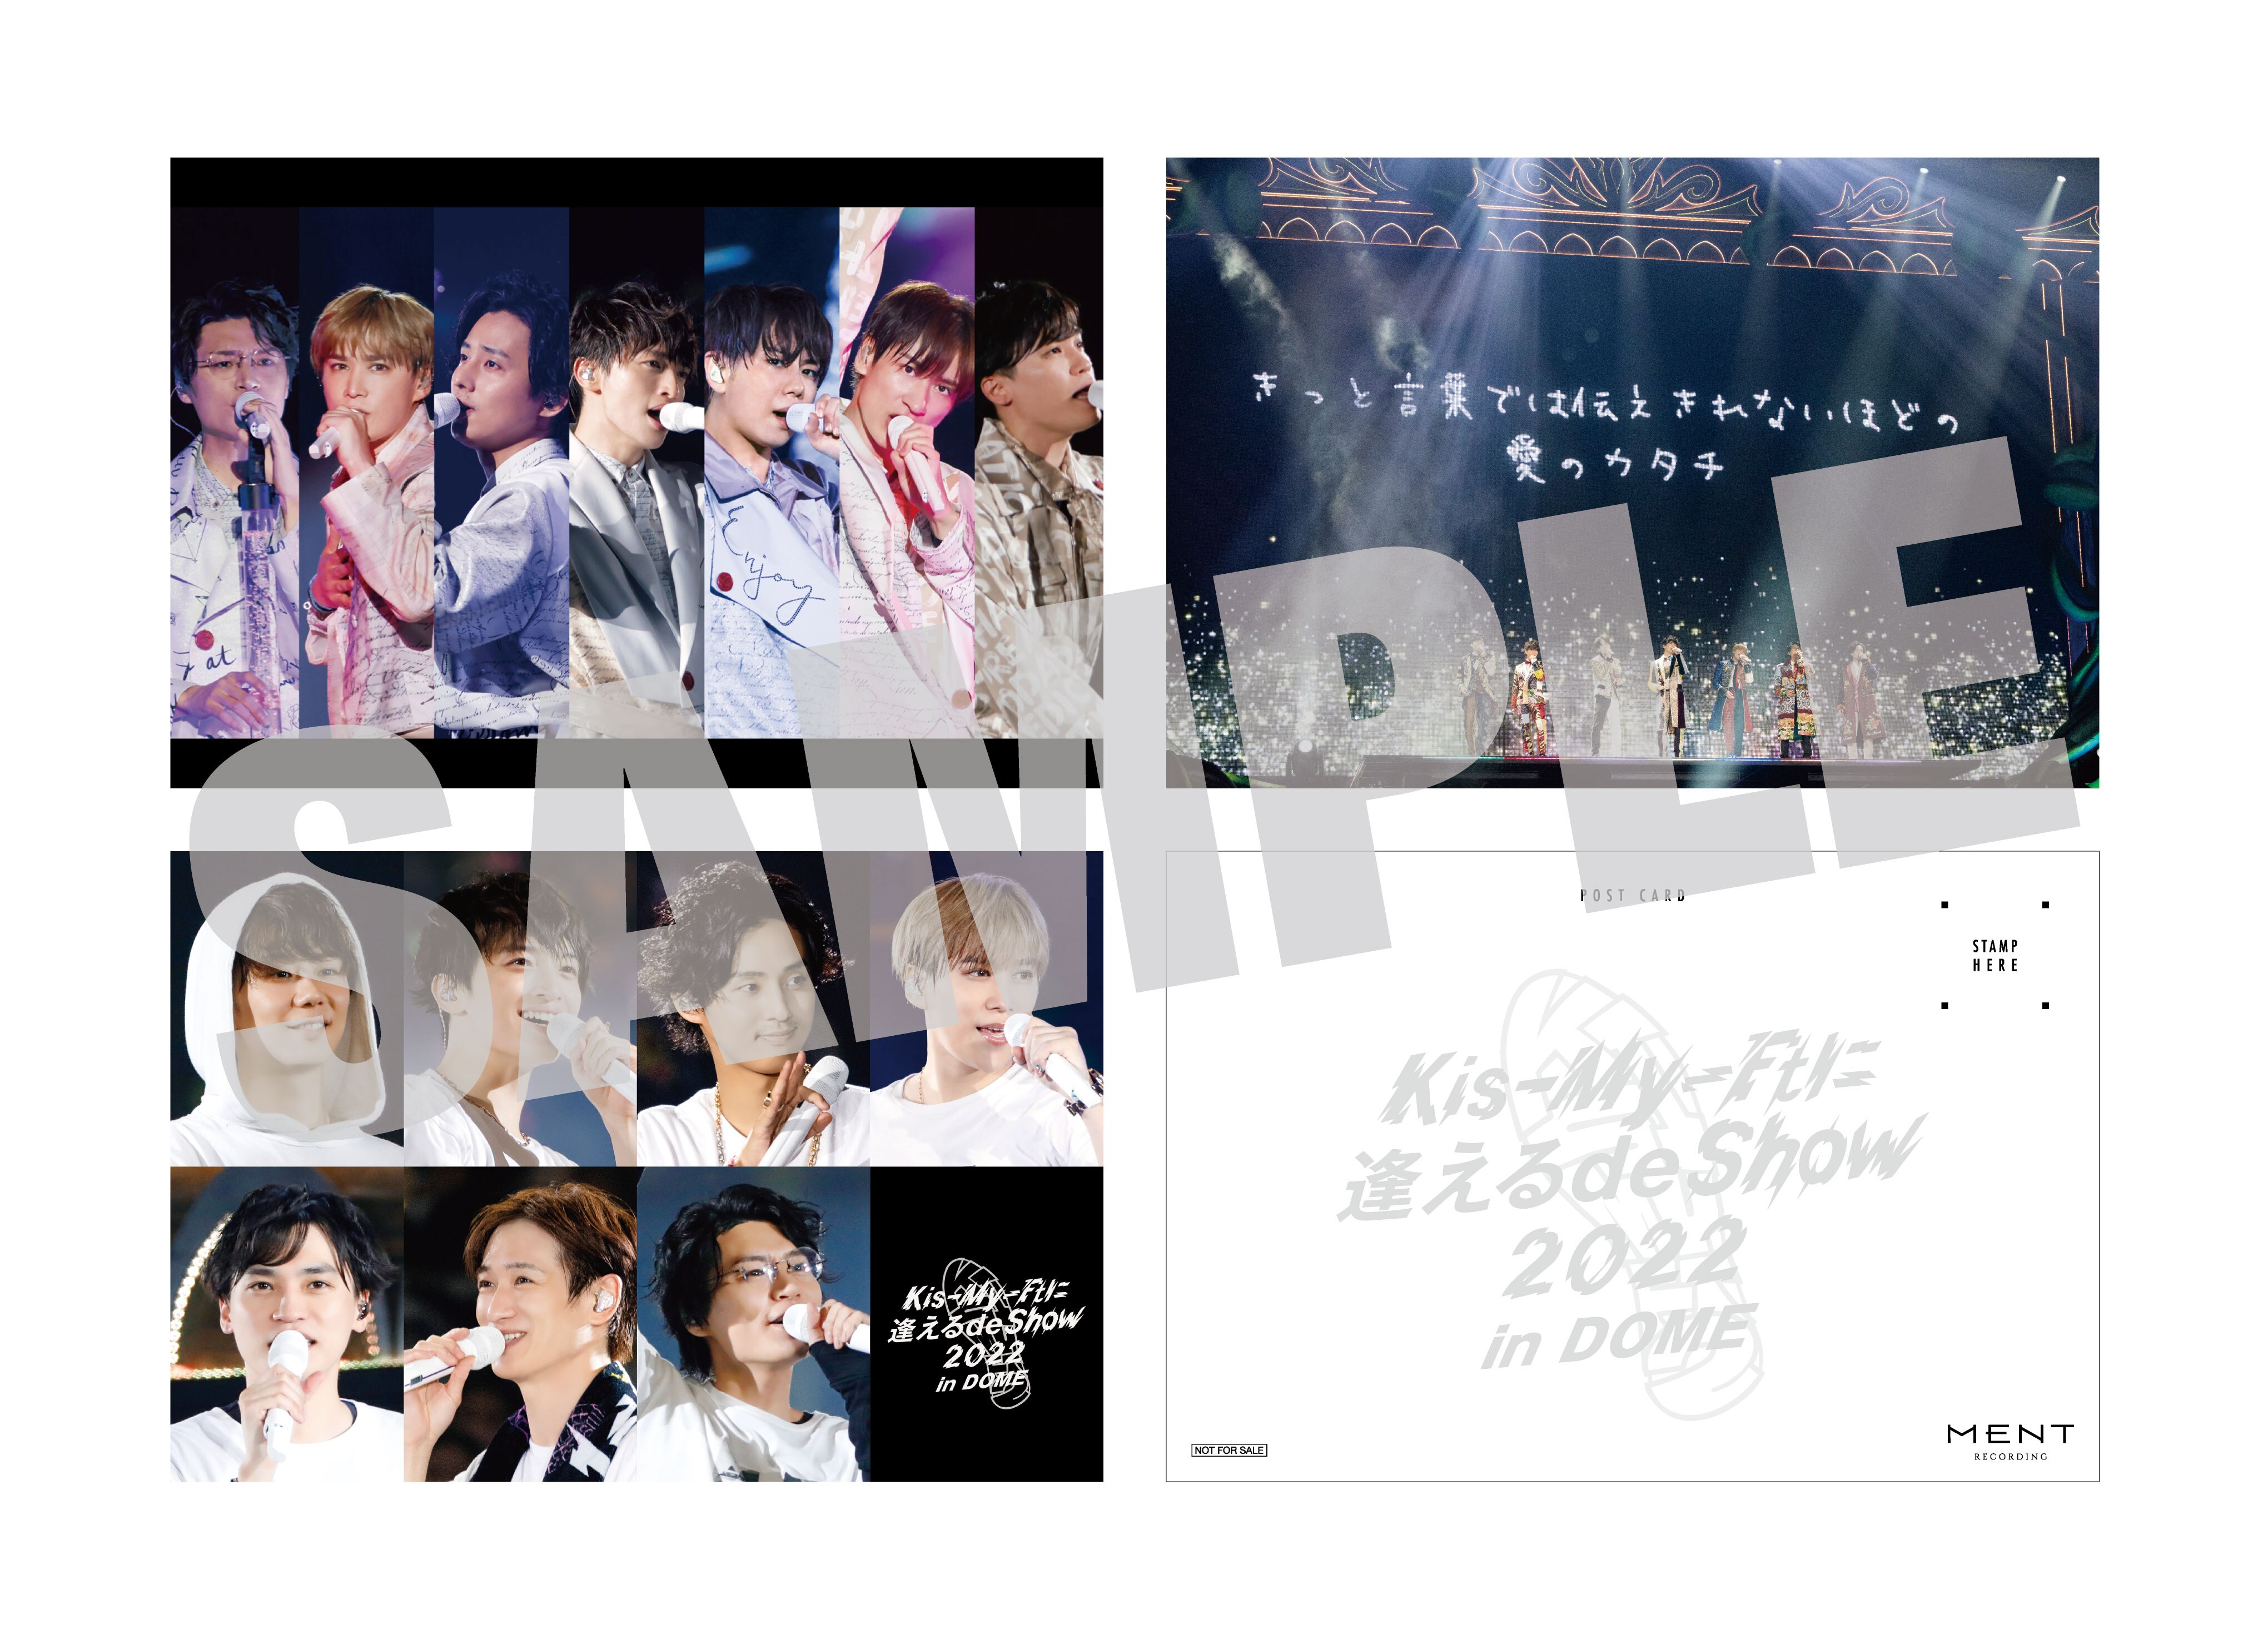 LIVE DVD & Blu-ray『Kis-My-Ftに逢えるde Show 2022 in DOME』 | Kis 